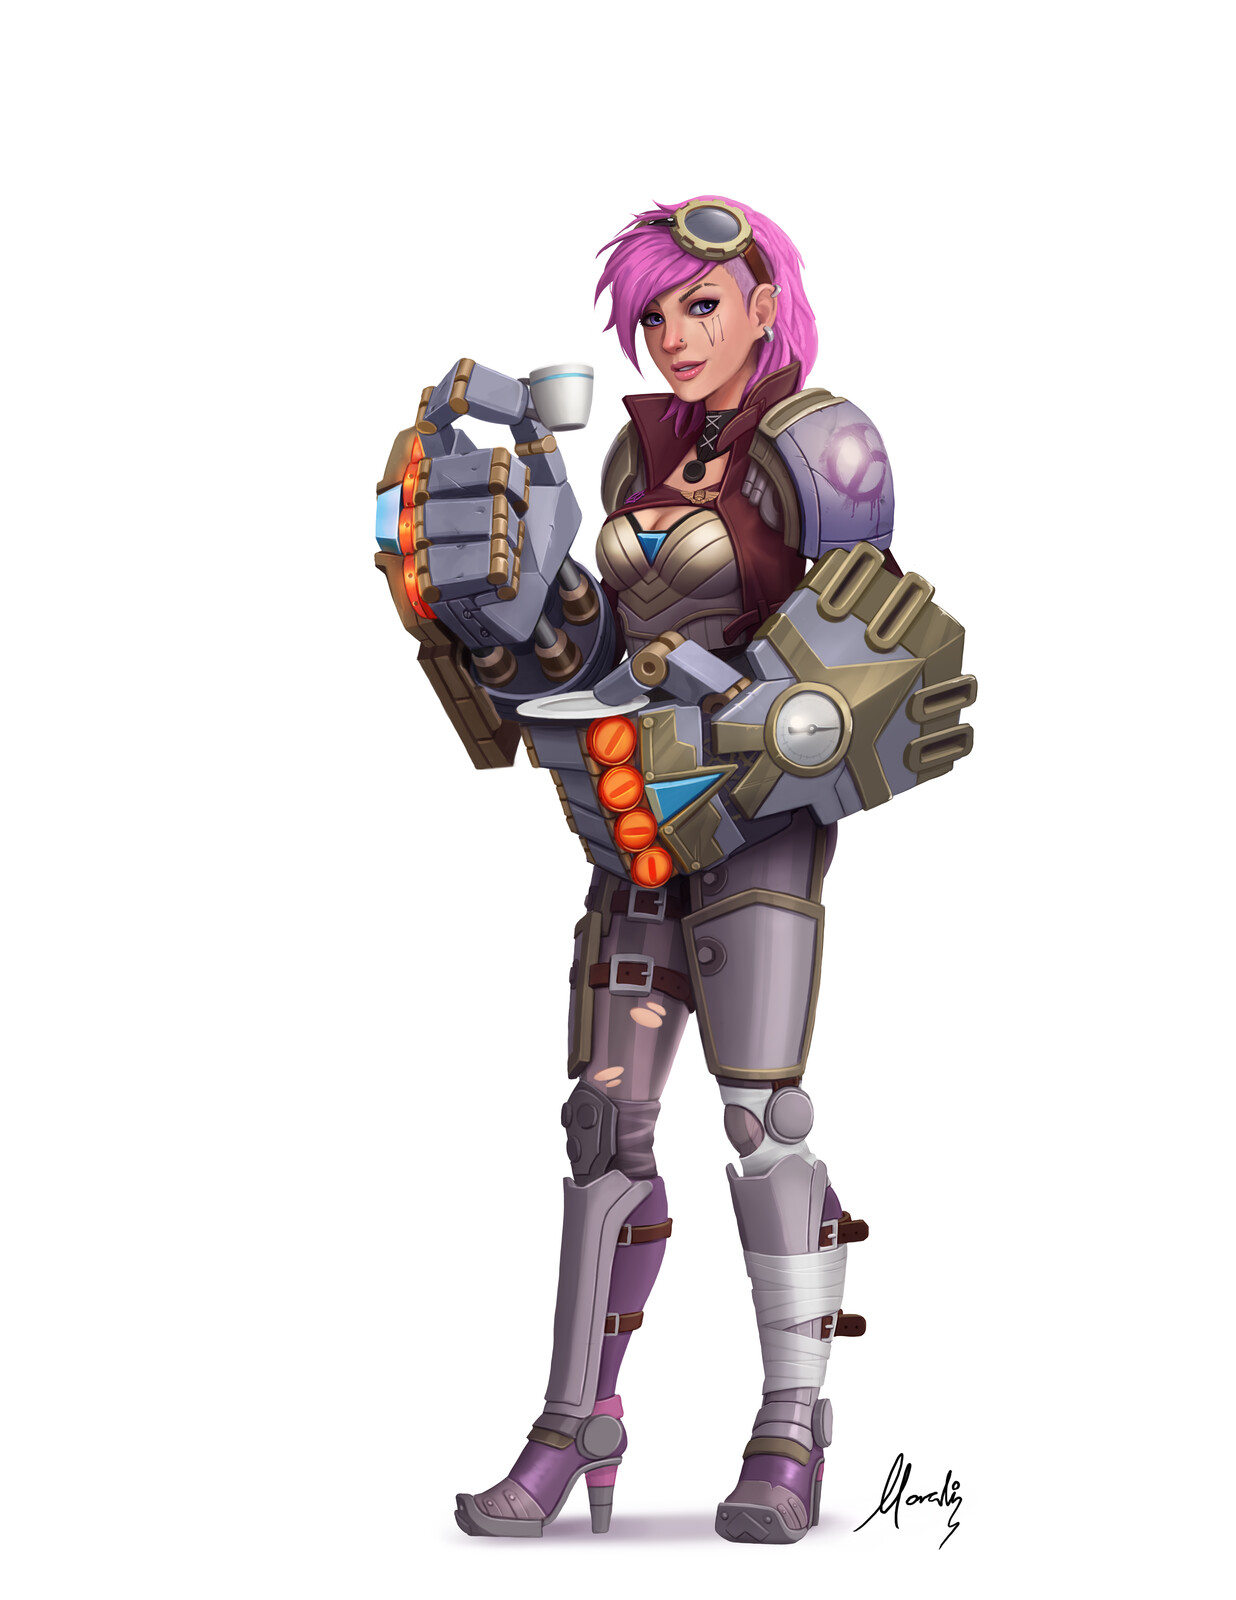 The fist character I finished: Vi, Piltover's Enforcer.